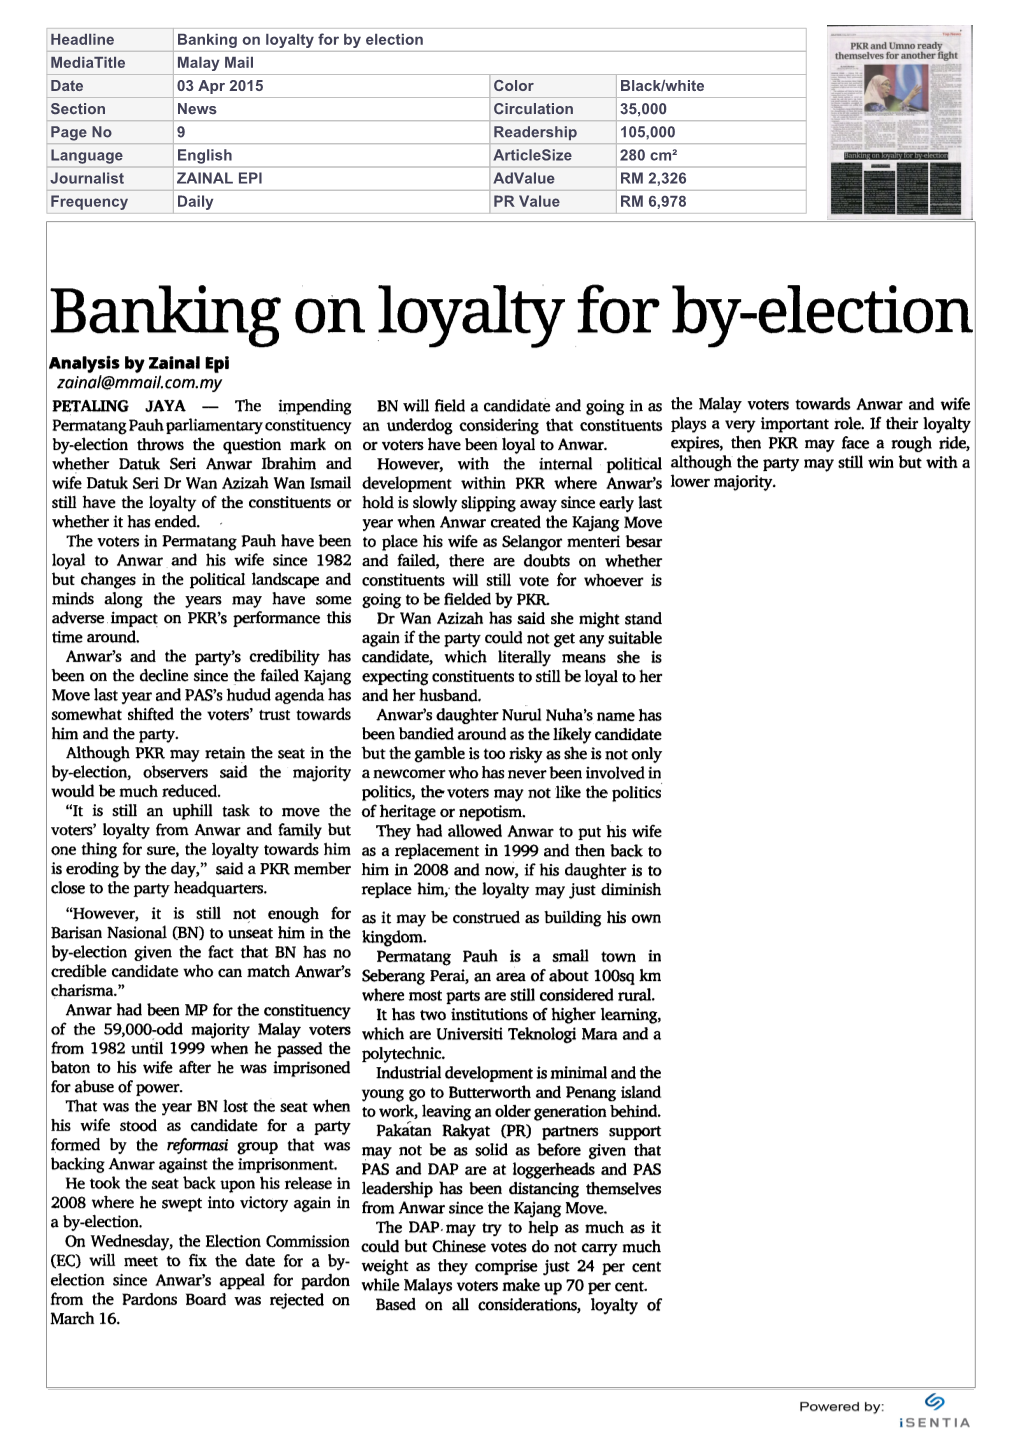 Banking on Loyalty for Byelection